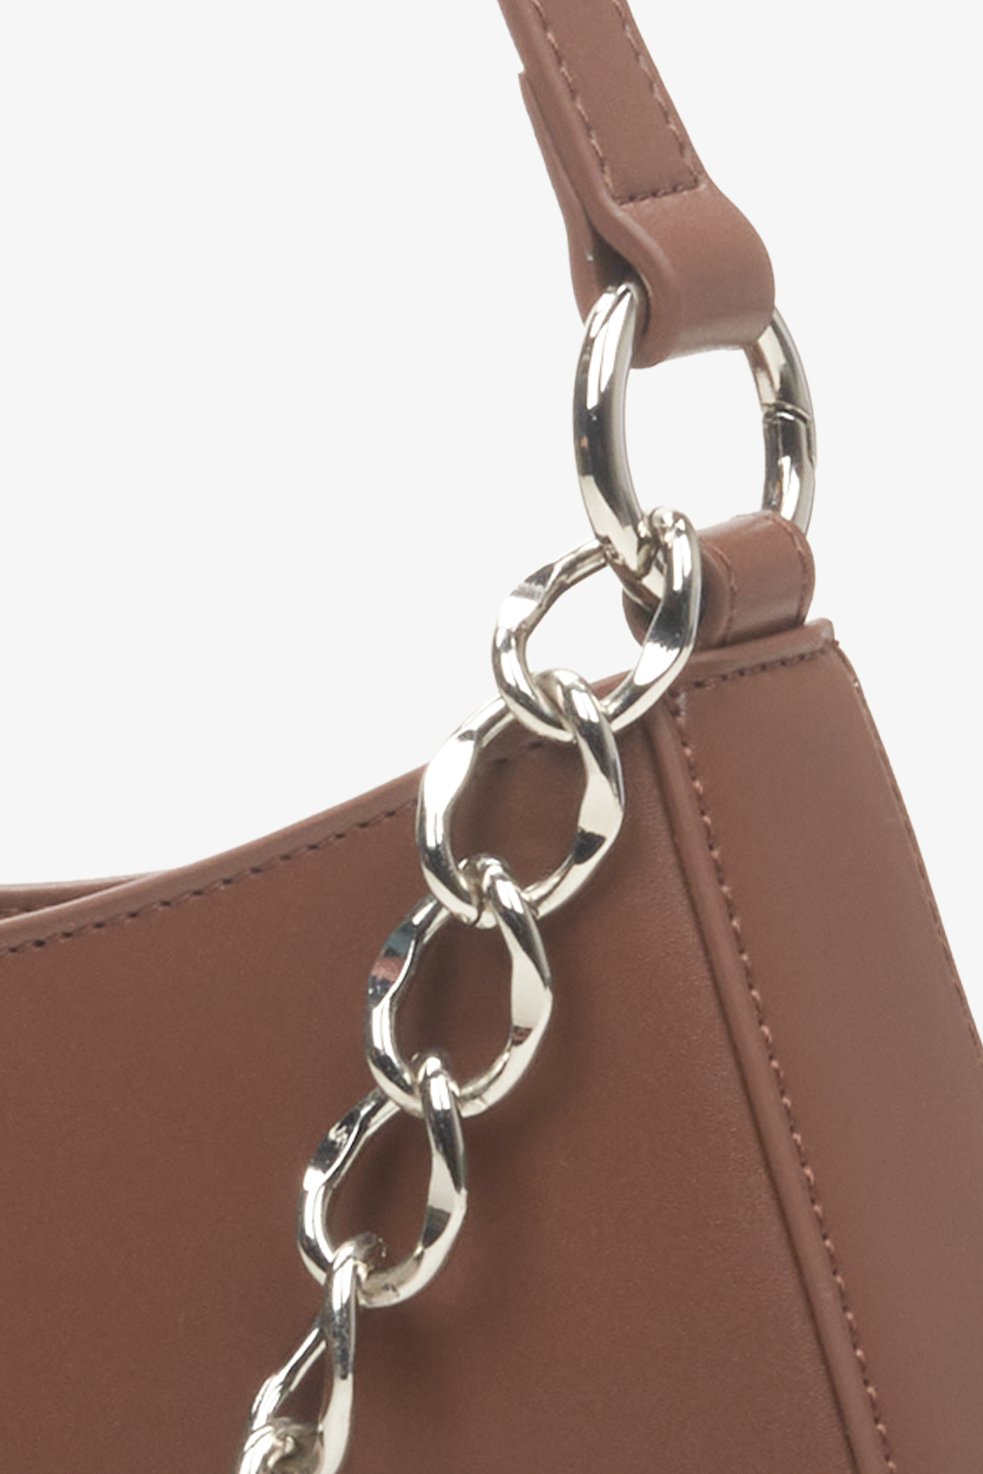 Women's brown baguette bag with decorative chain by Estro - close-up on details.